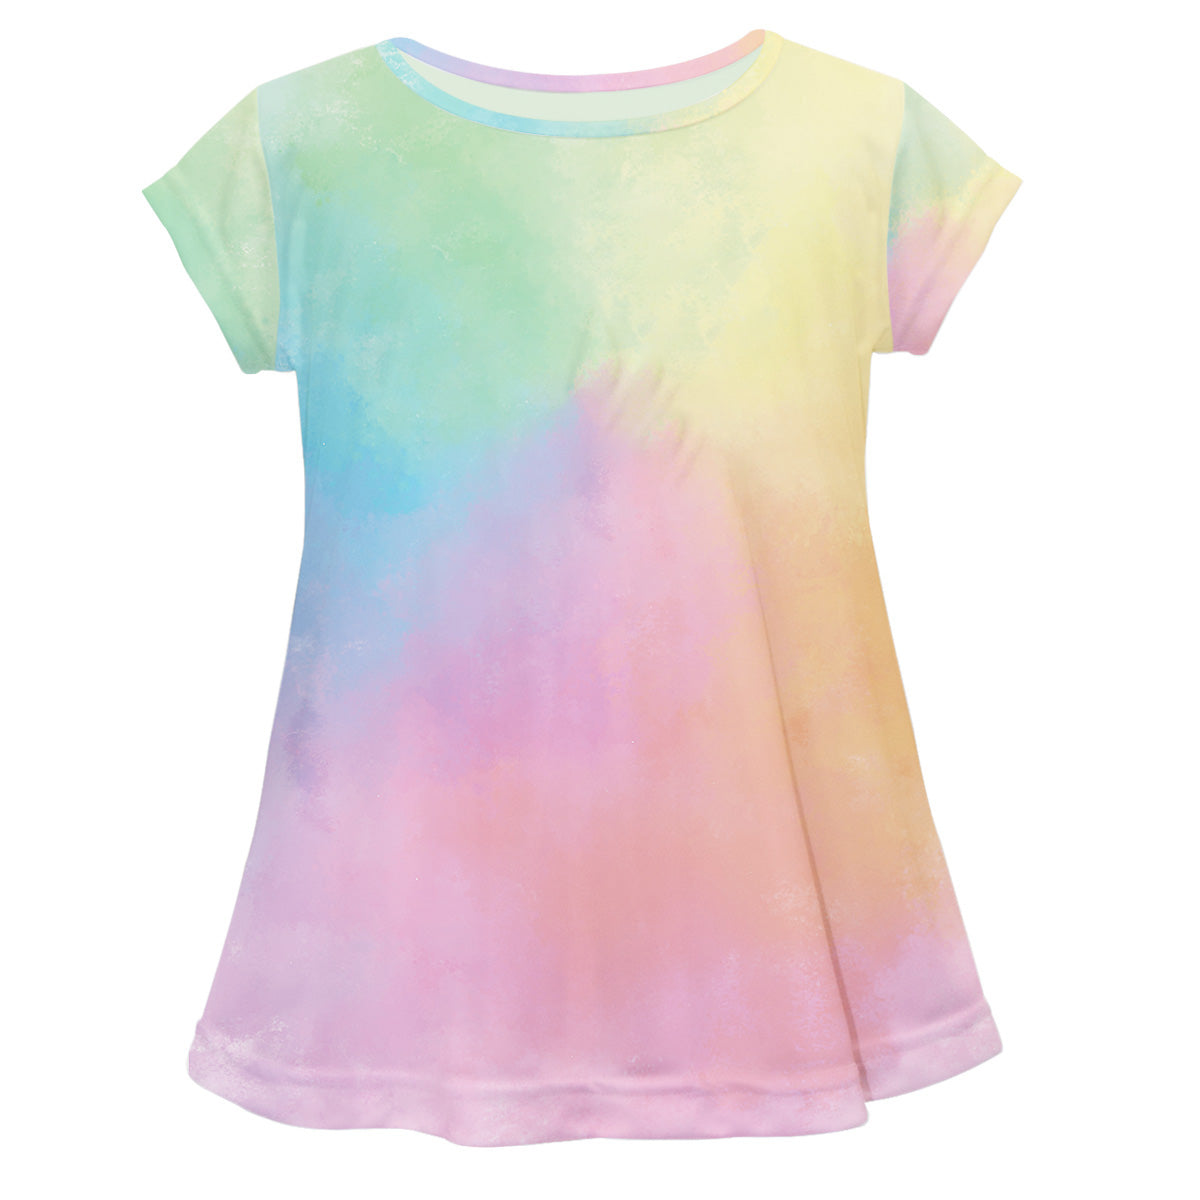 Monogram Pink Yellow And Blue Tie Dye Short Sleeve Laurie Top - Wimziy&Co.